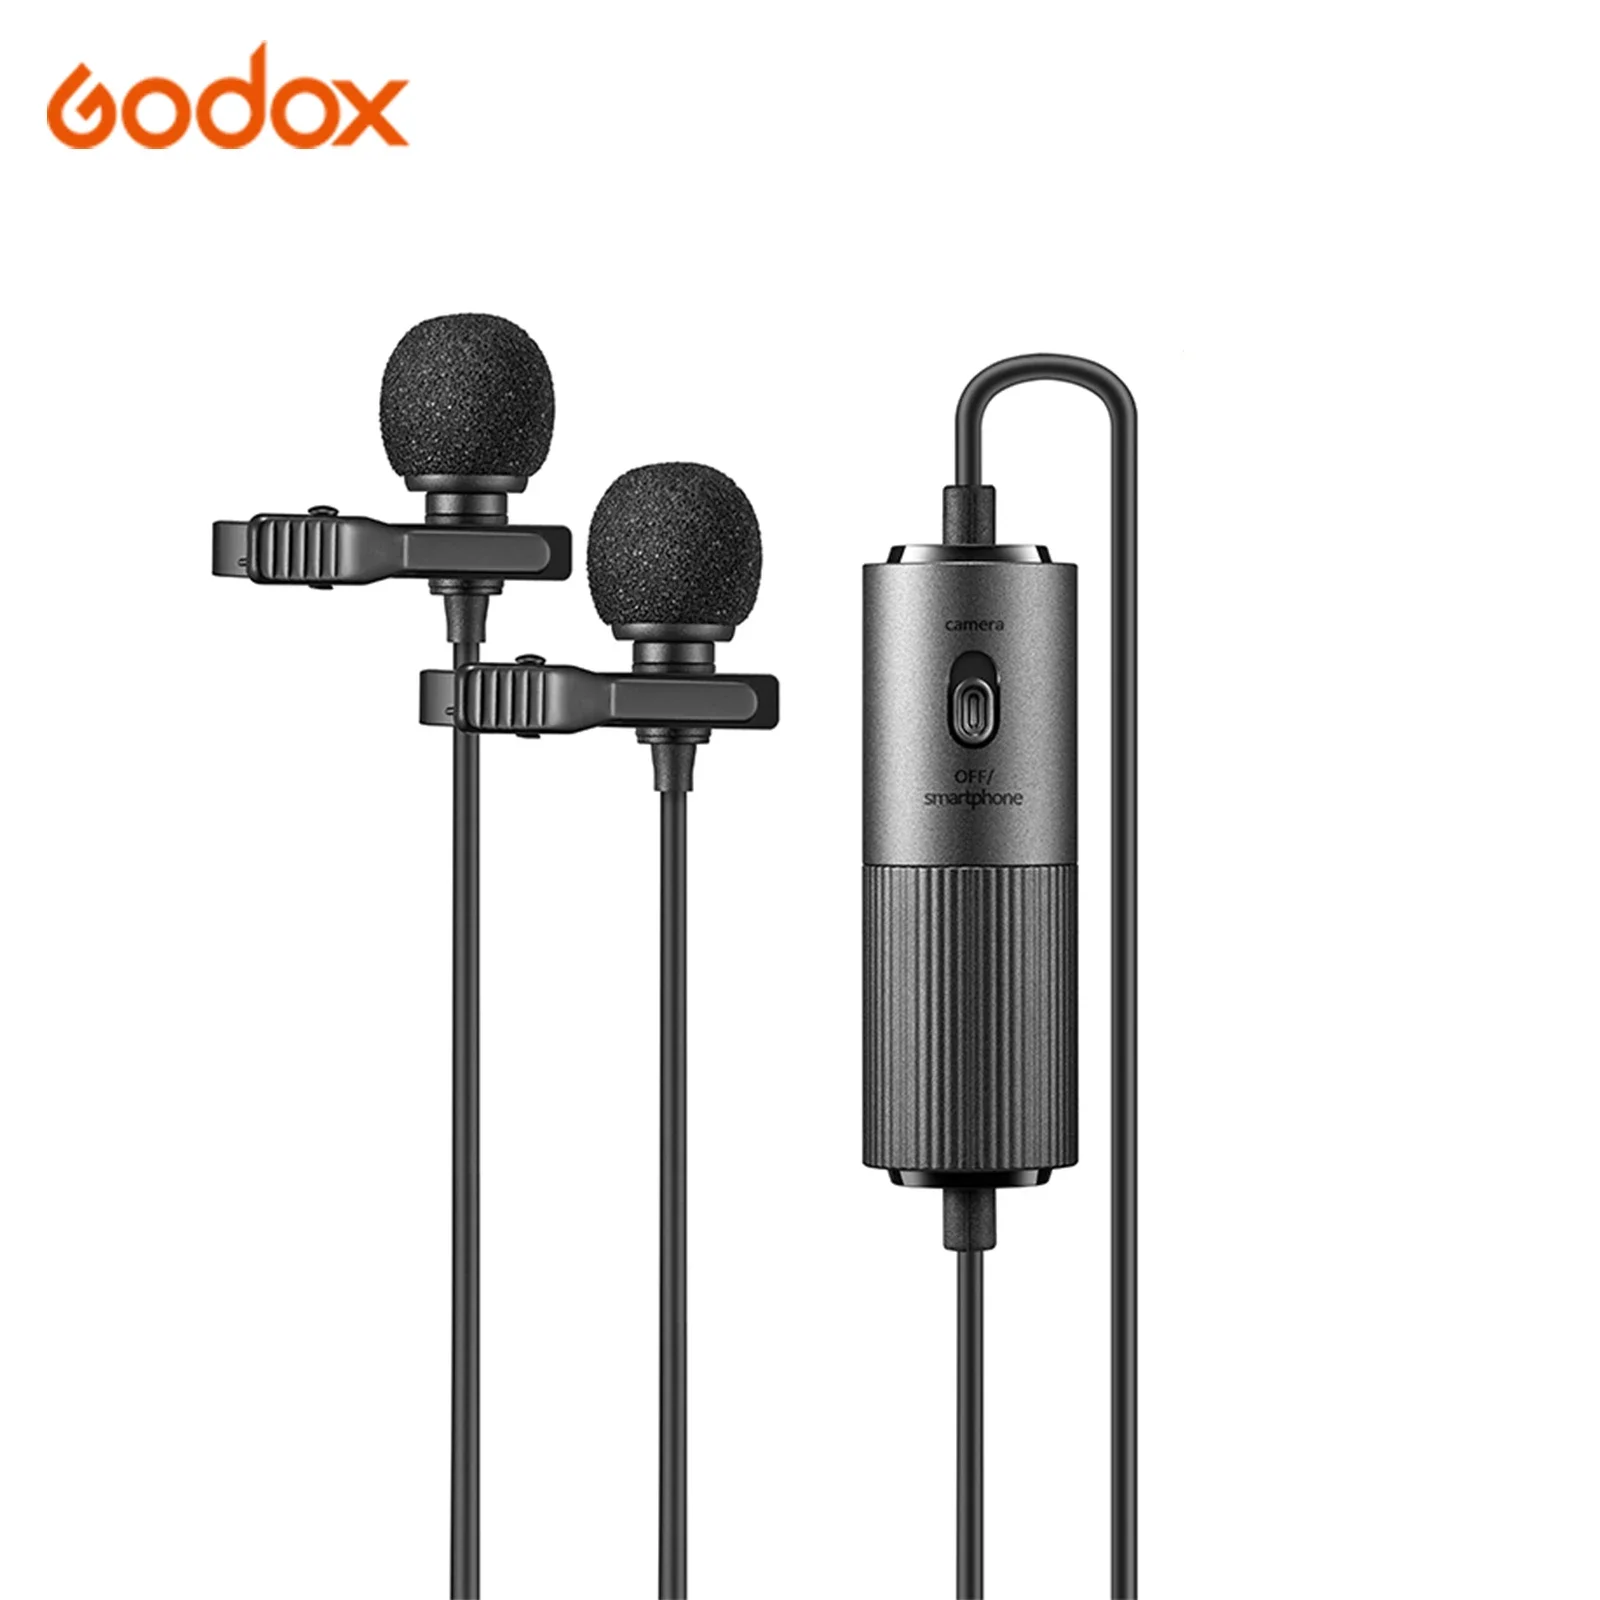 

Godox LMS-60G Lavalier Microphone Standard Gain Omnidirectional Wired Mic for Interview Meeting Live Streaming 6m Cable